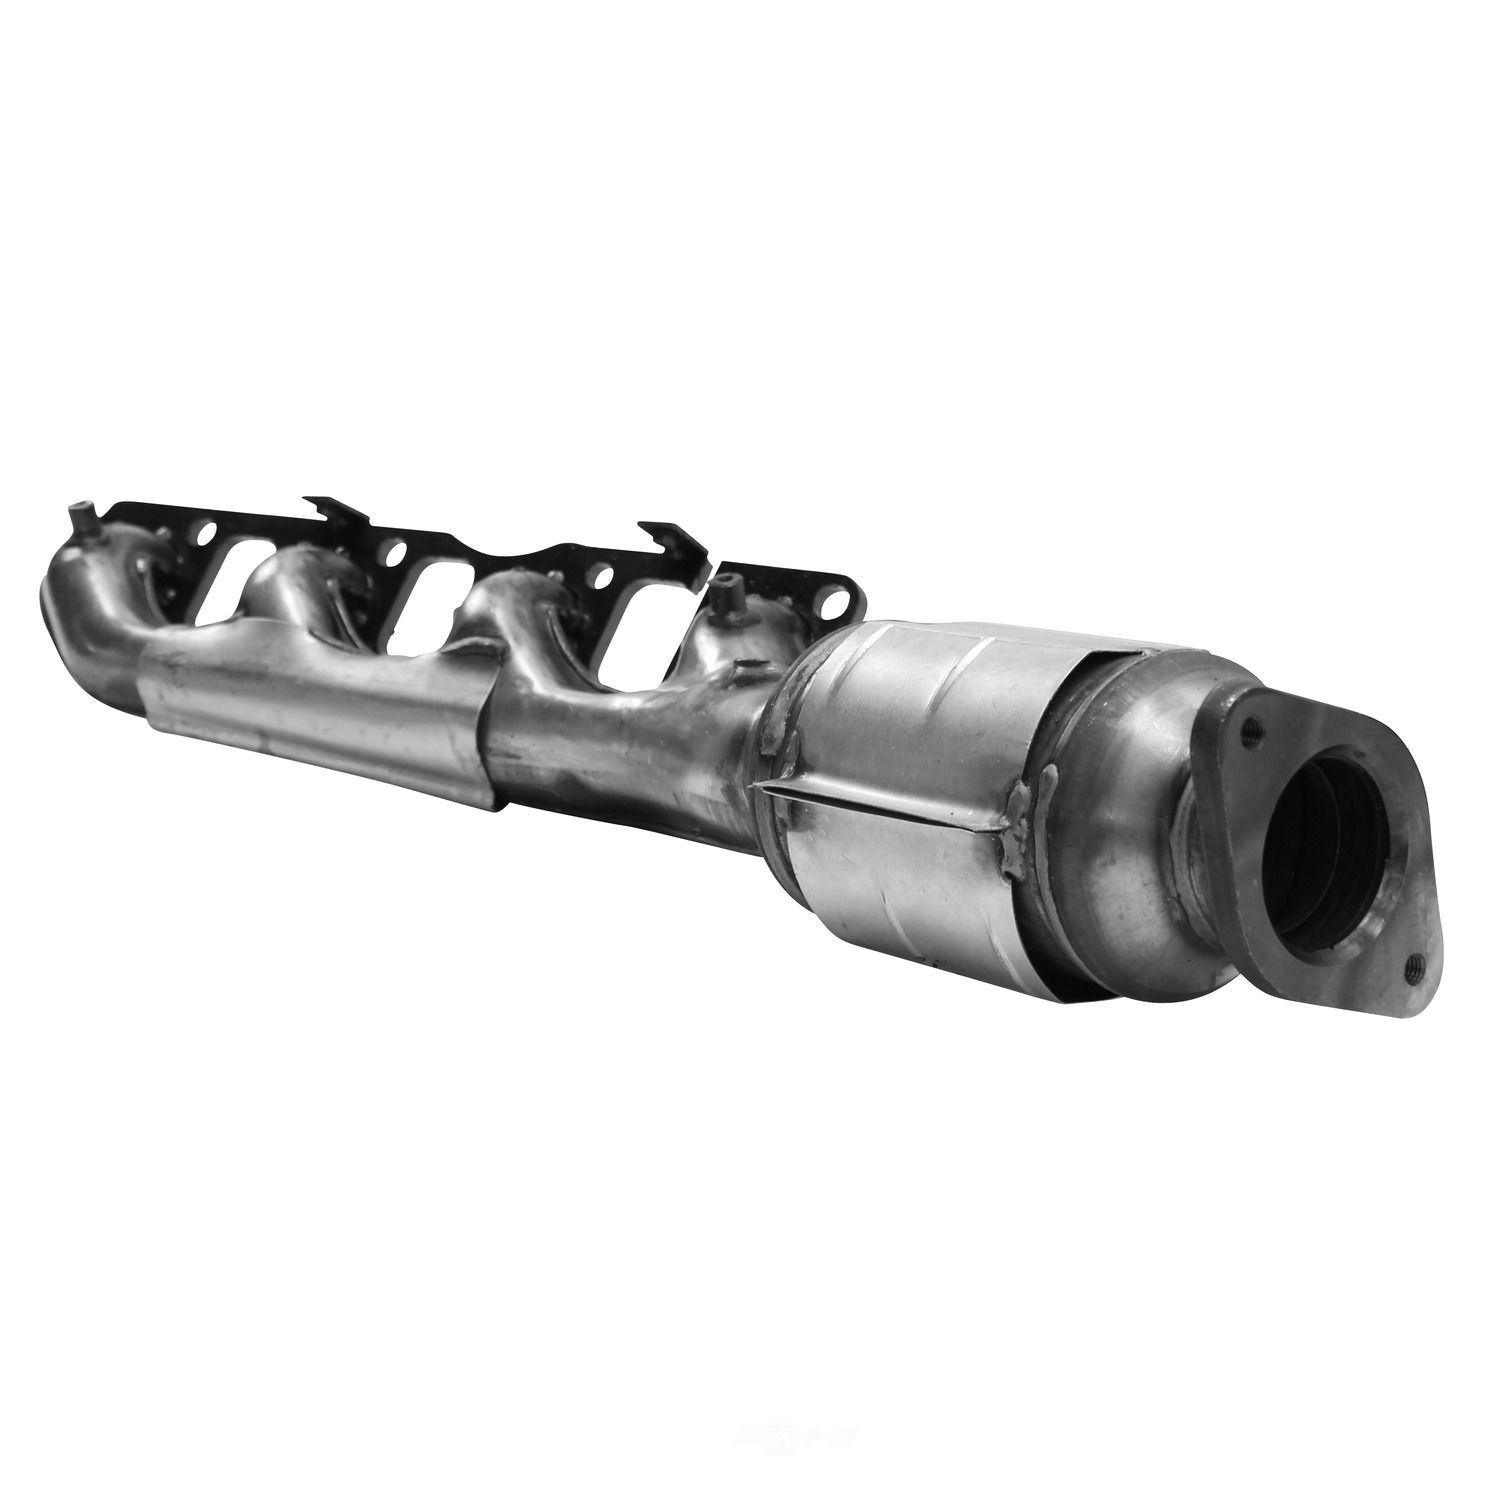 AP EXHAUST W/FEDERAL CONVERTER - Direct Fit Converter w/ Manifold - APF 641353